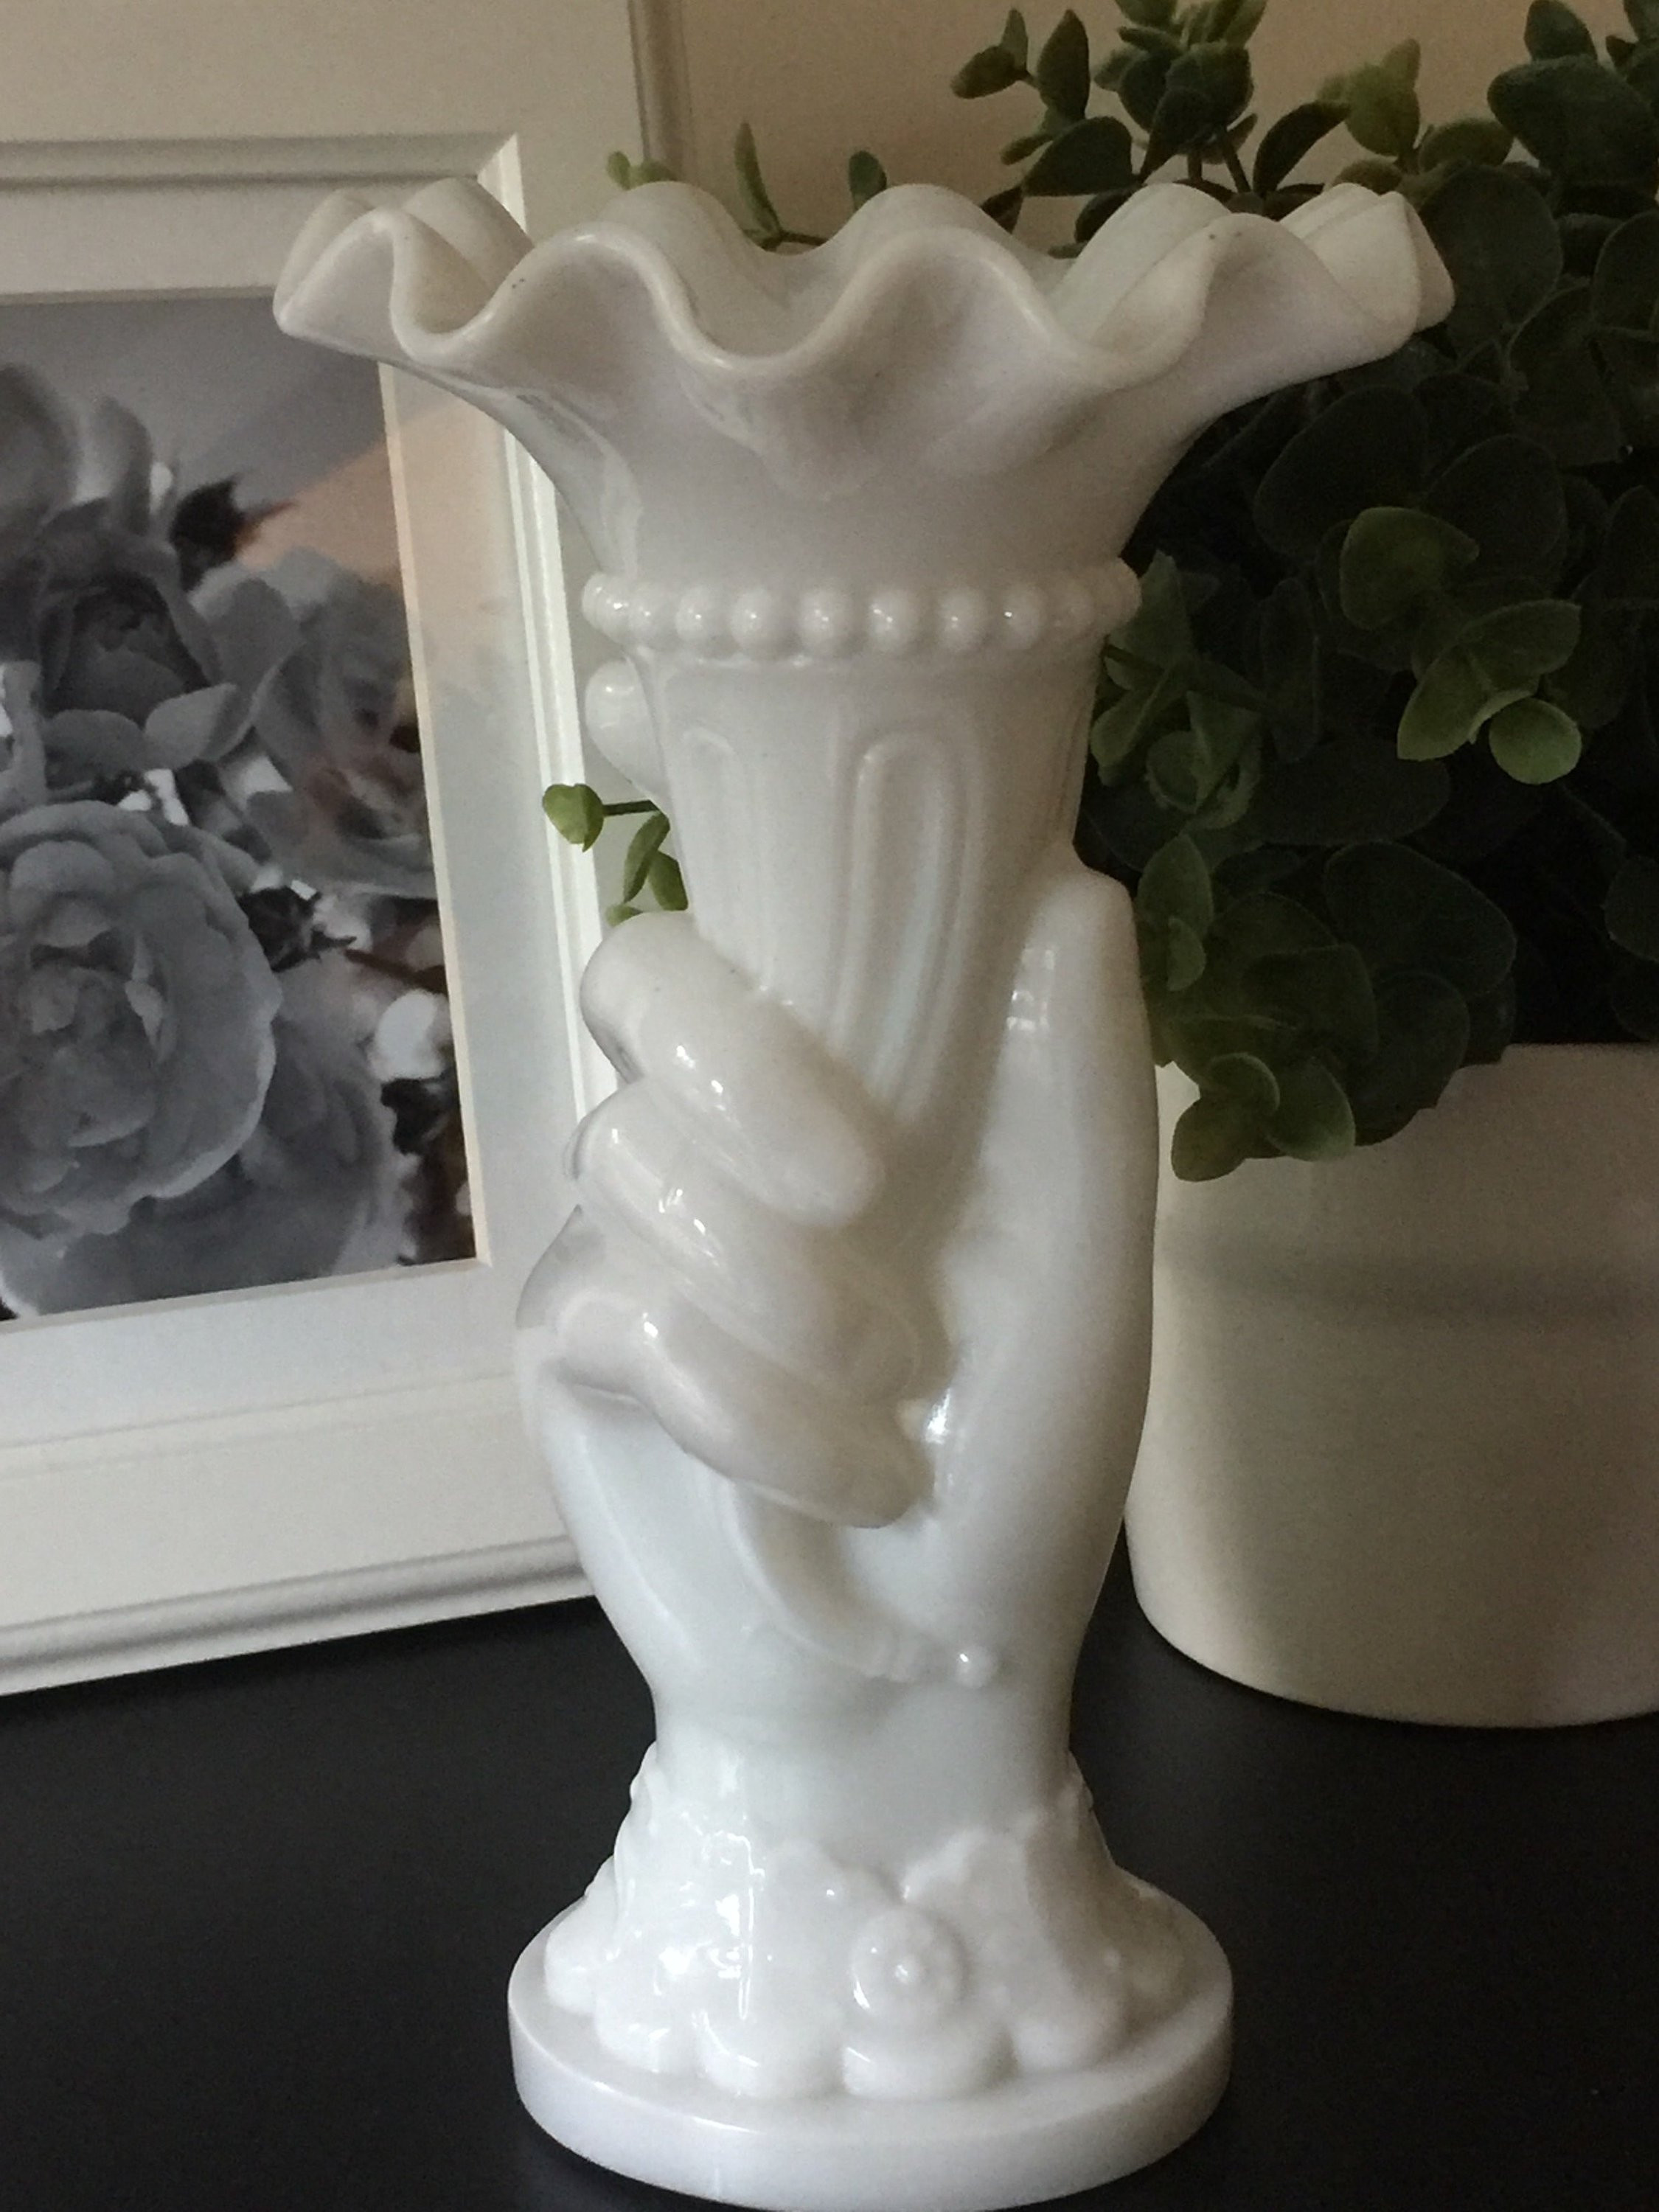 21 attractive Weller Pottery Vase Wild Rose 2024 free download weller pottery vase wild rose of vintage milk glass hand holding torch vase lady liberty hand etsy regarding image